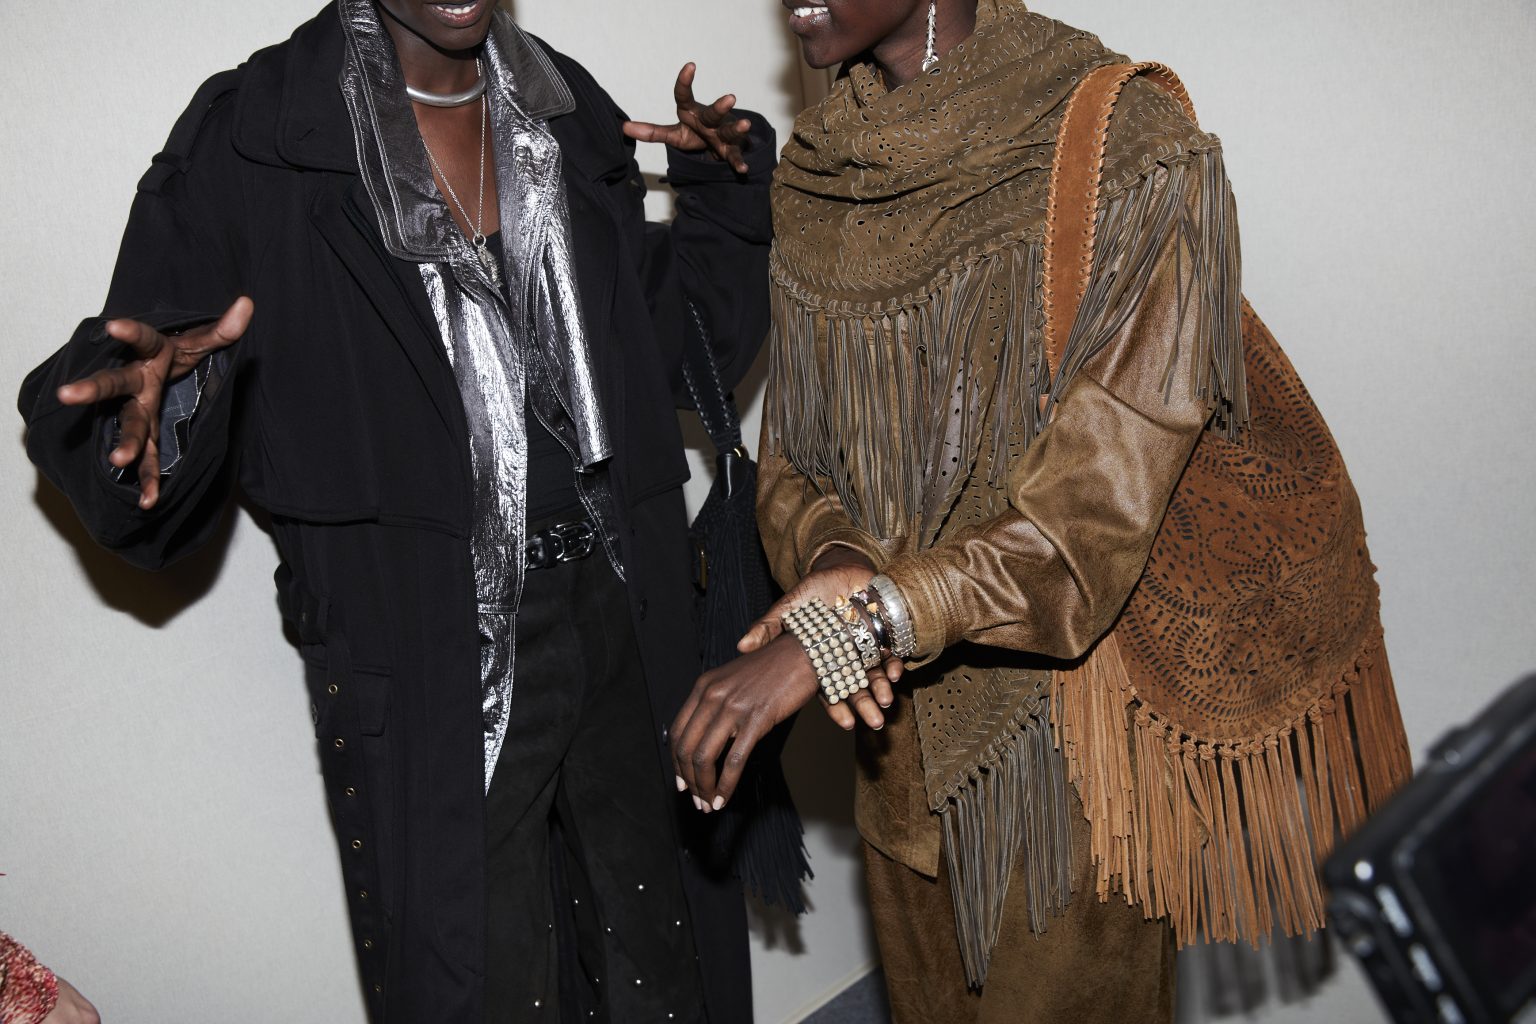 Backstage image of two models’ midsections, one in brown clothing with various fringe details, one in a silver blouse under a black jacket.